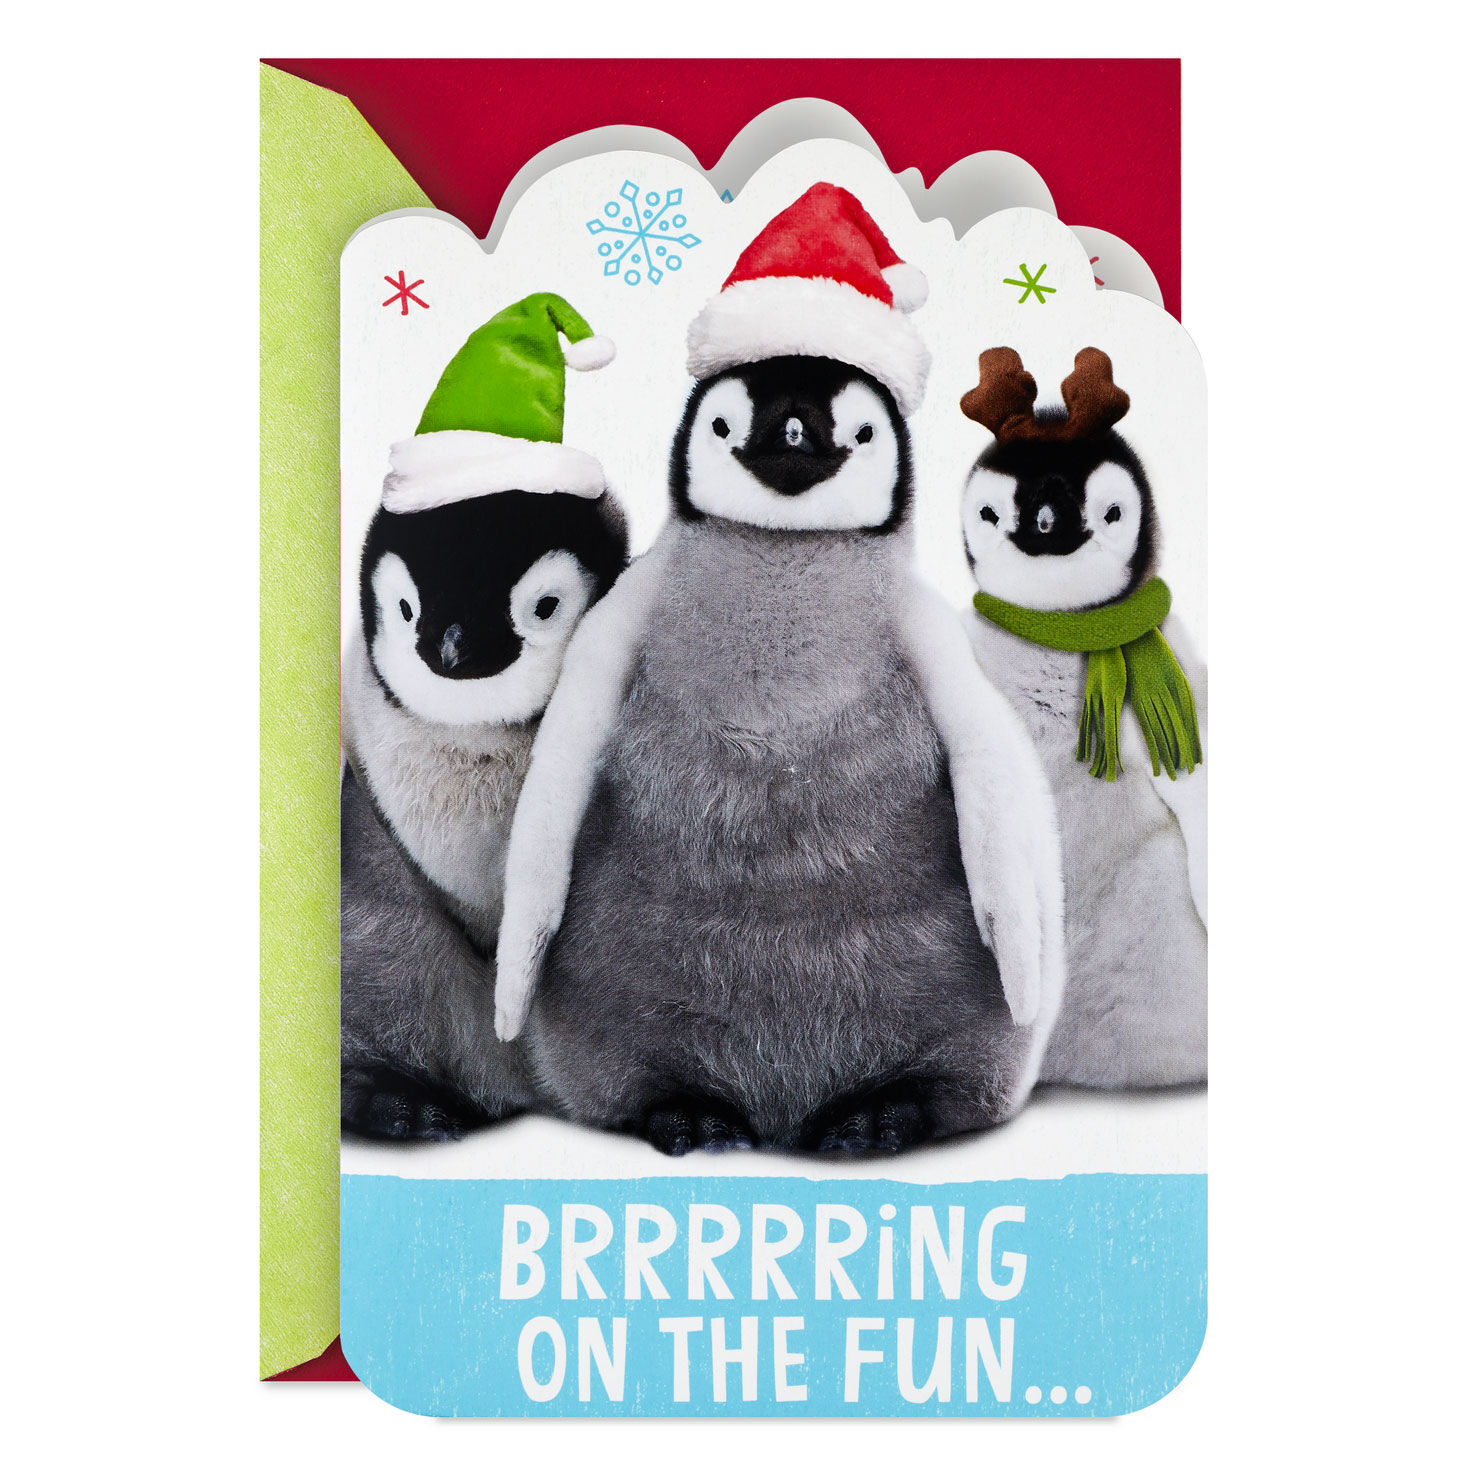 Feathers McGraw - Funny penguin Greeting Card for Sale by PMinSince98